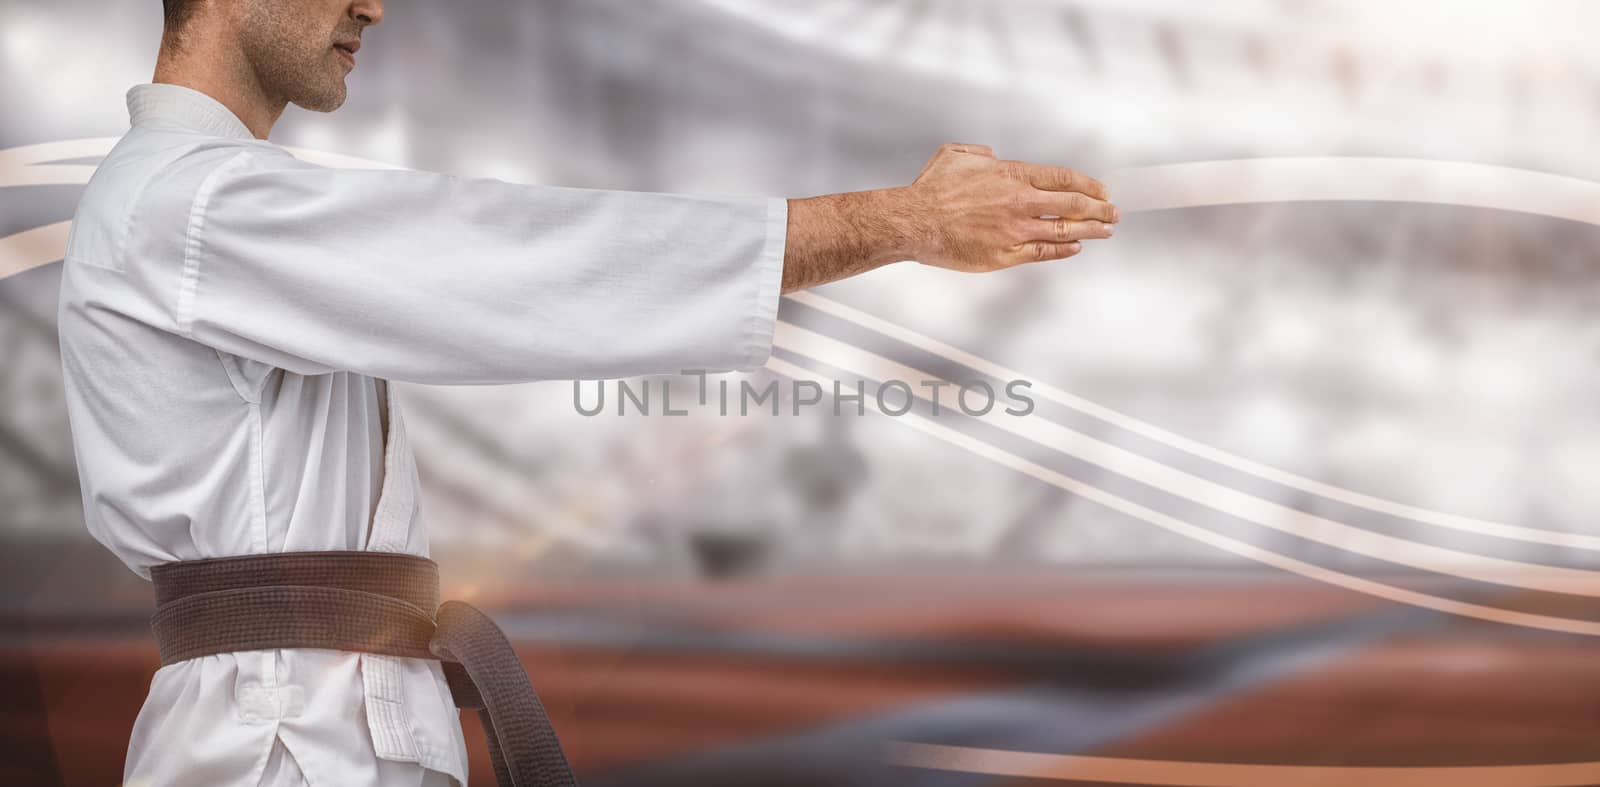 Composite image of mid section of fighter performing karate stance by Wavebreakmedia